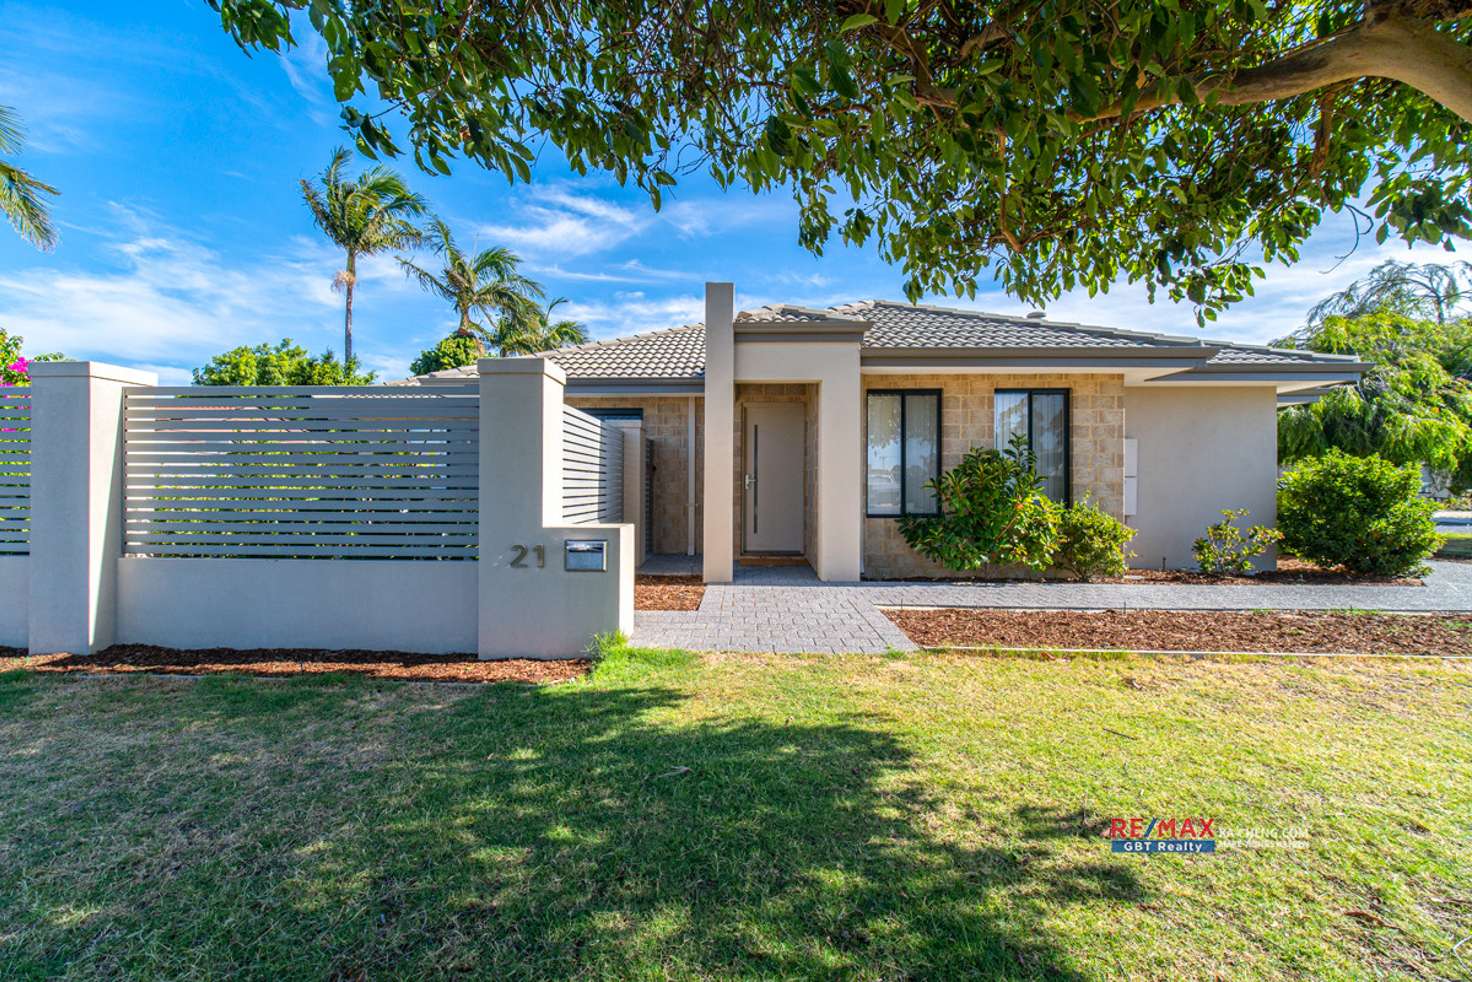 Main view of Homely house listing, 21 Araluen Street, Morley WA 6062